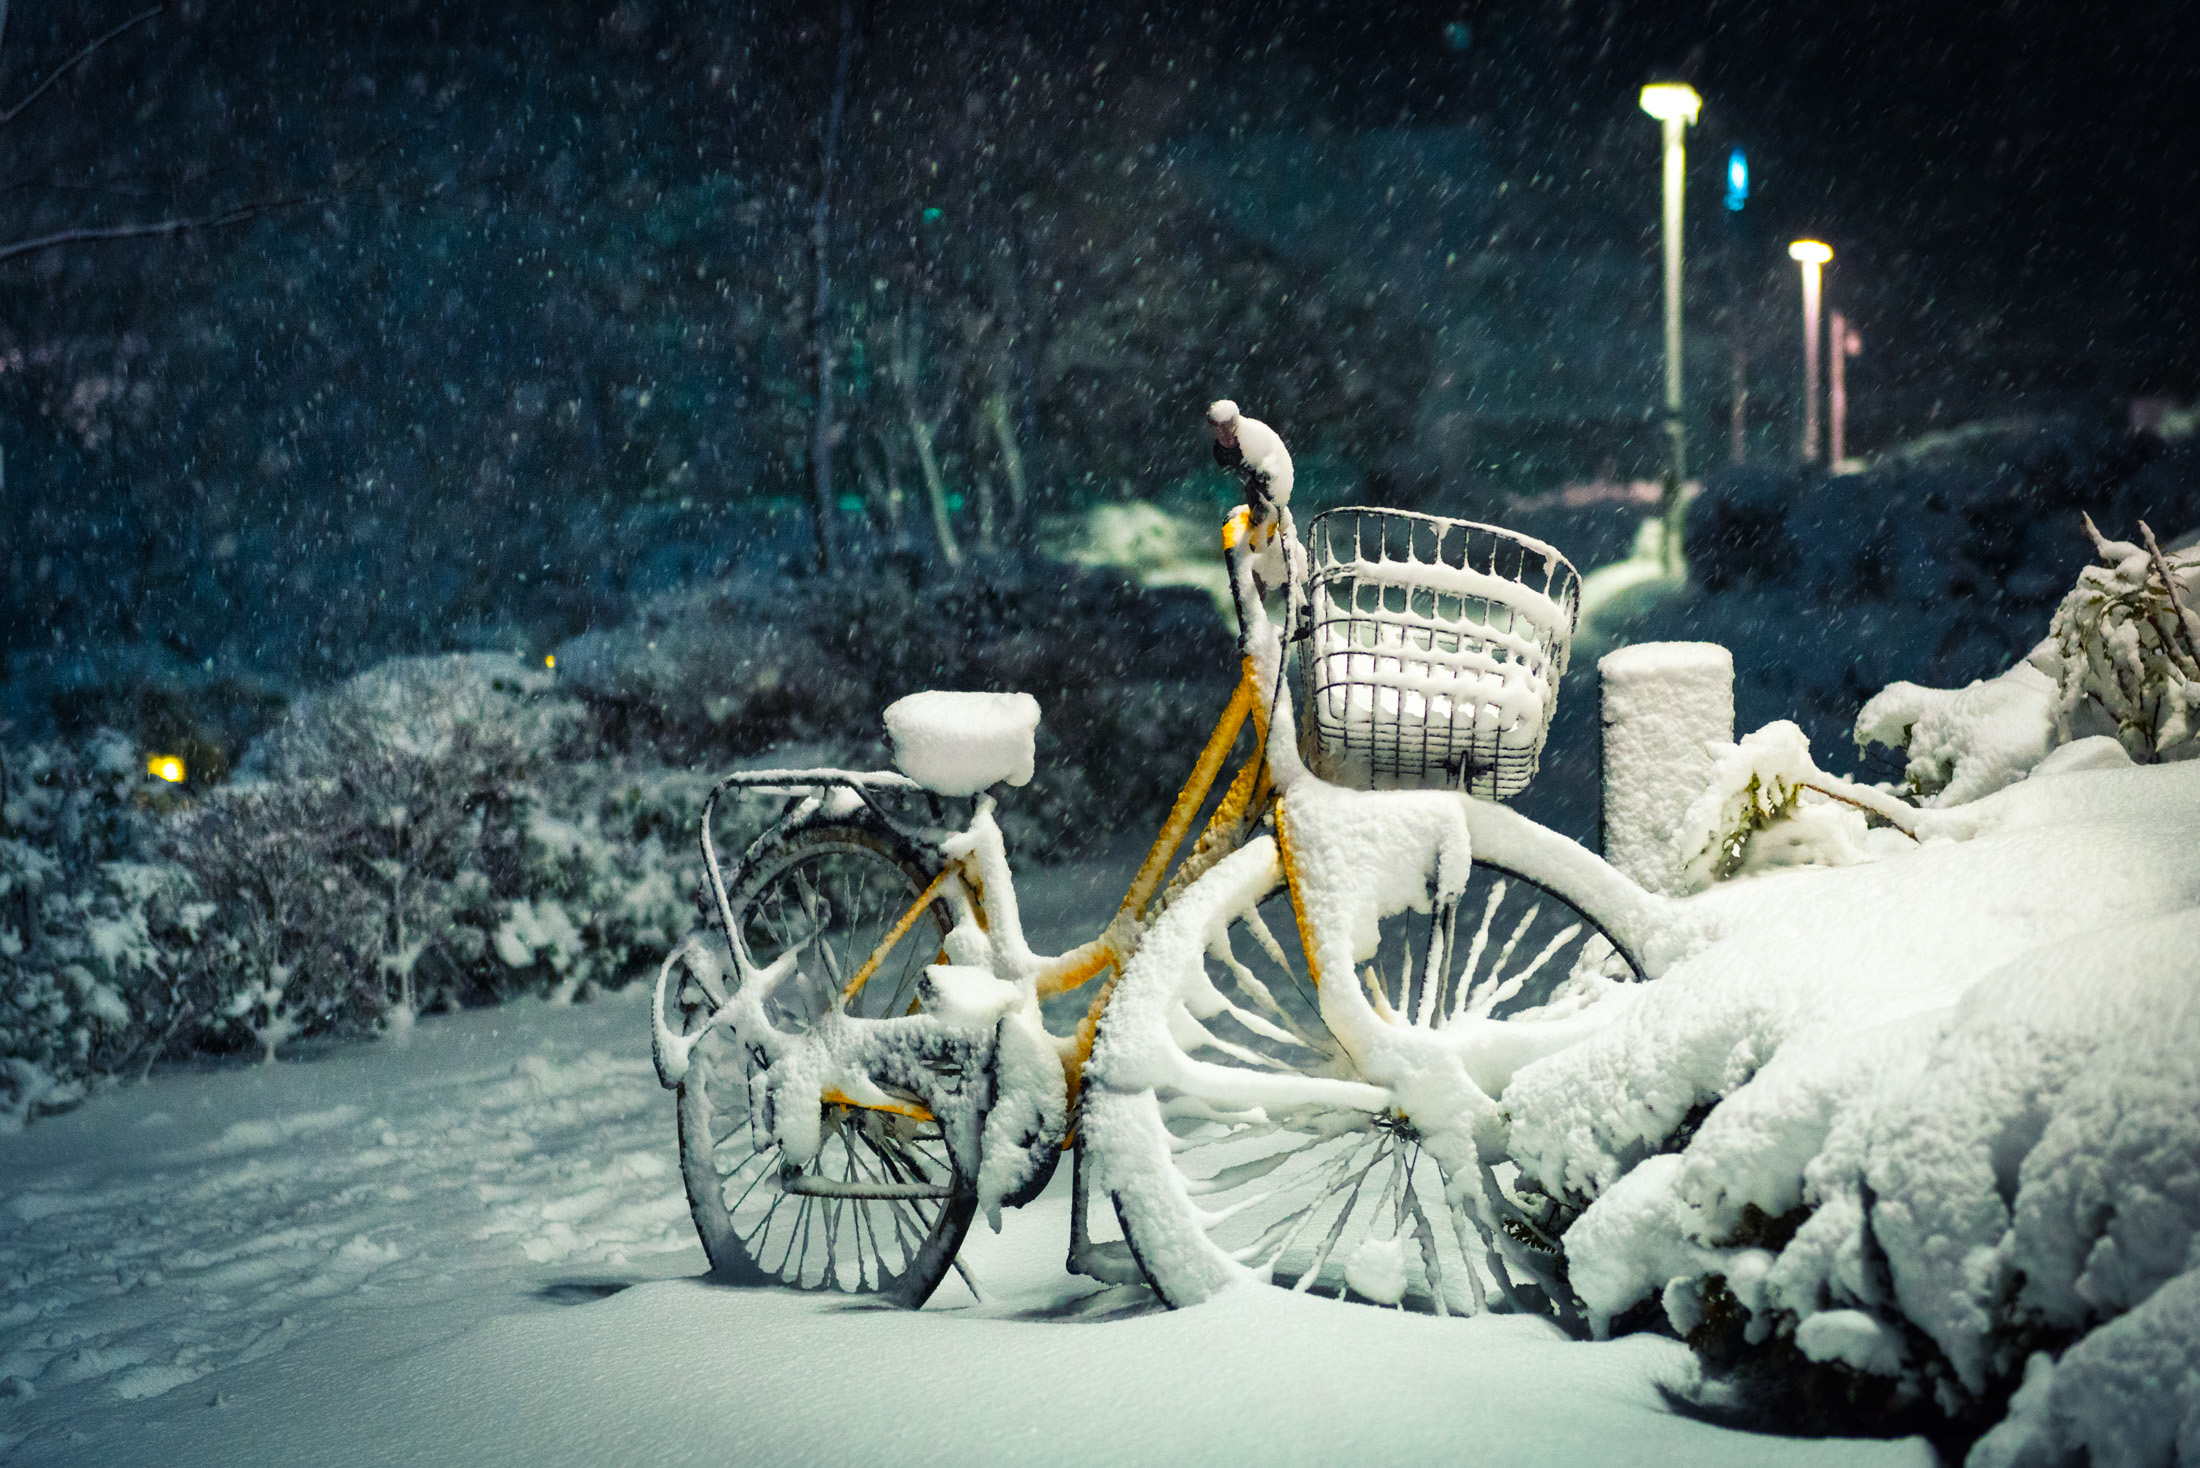 Tranquil snowy night in Roppongi, Tokyo, with vibrant yellow bike covered in snow.